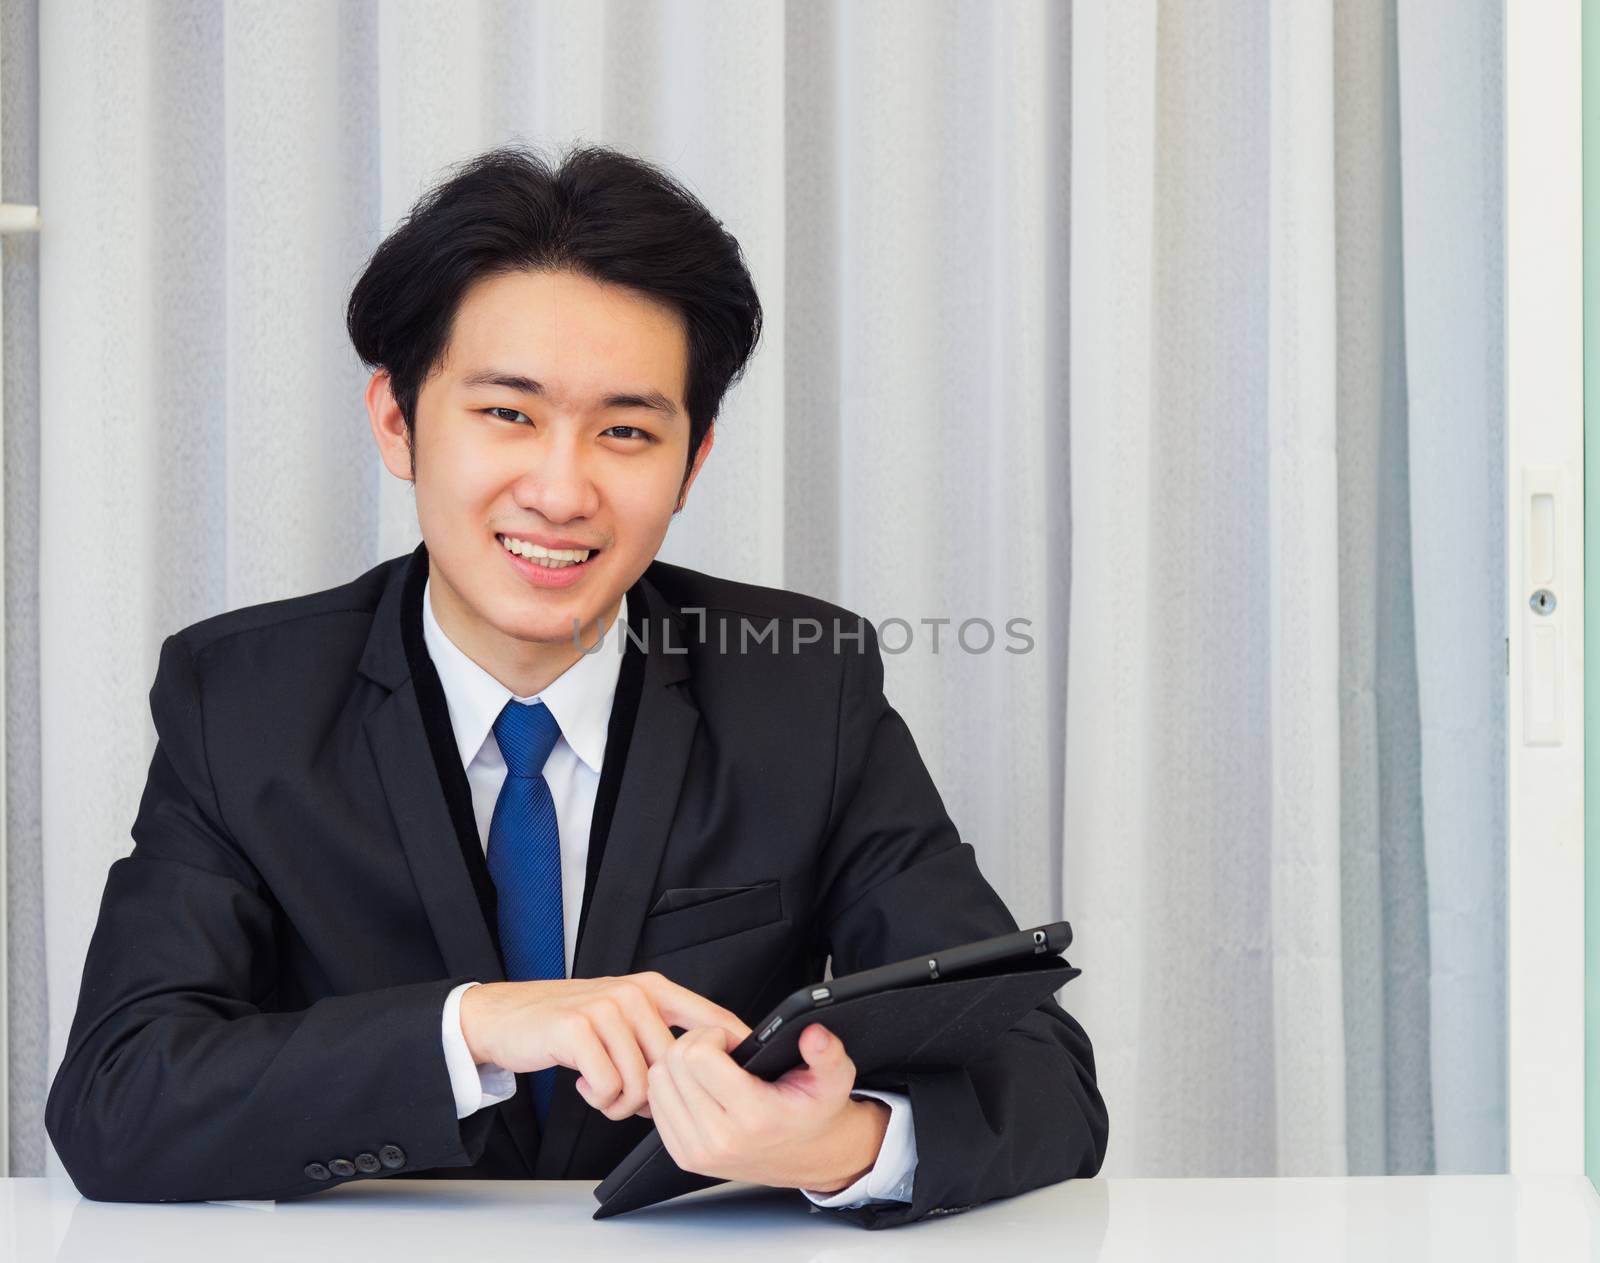 Work from home, Asian young businessman video conference call or facetime he smiling looking to camera sitting on desk using smart digital tablet computer touching on screen at home office